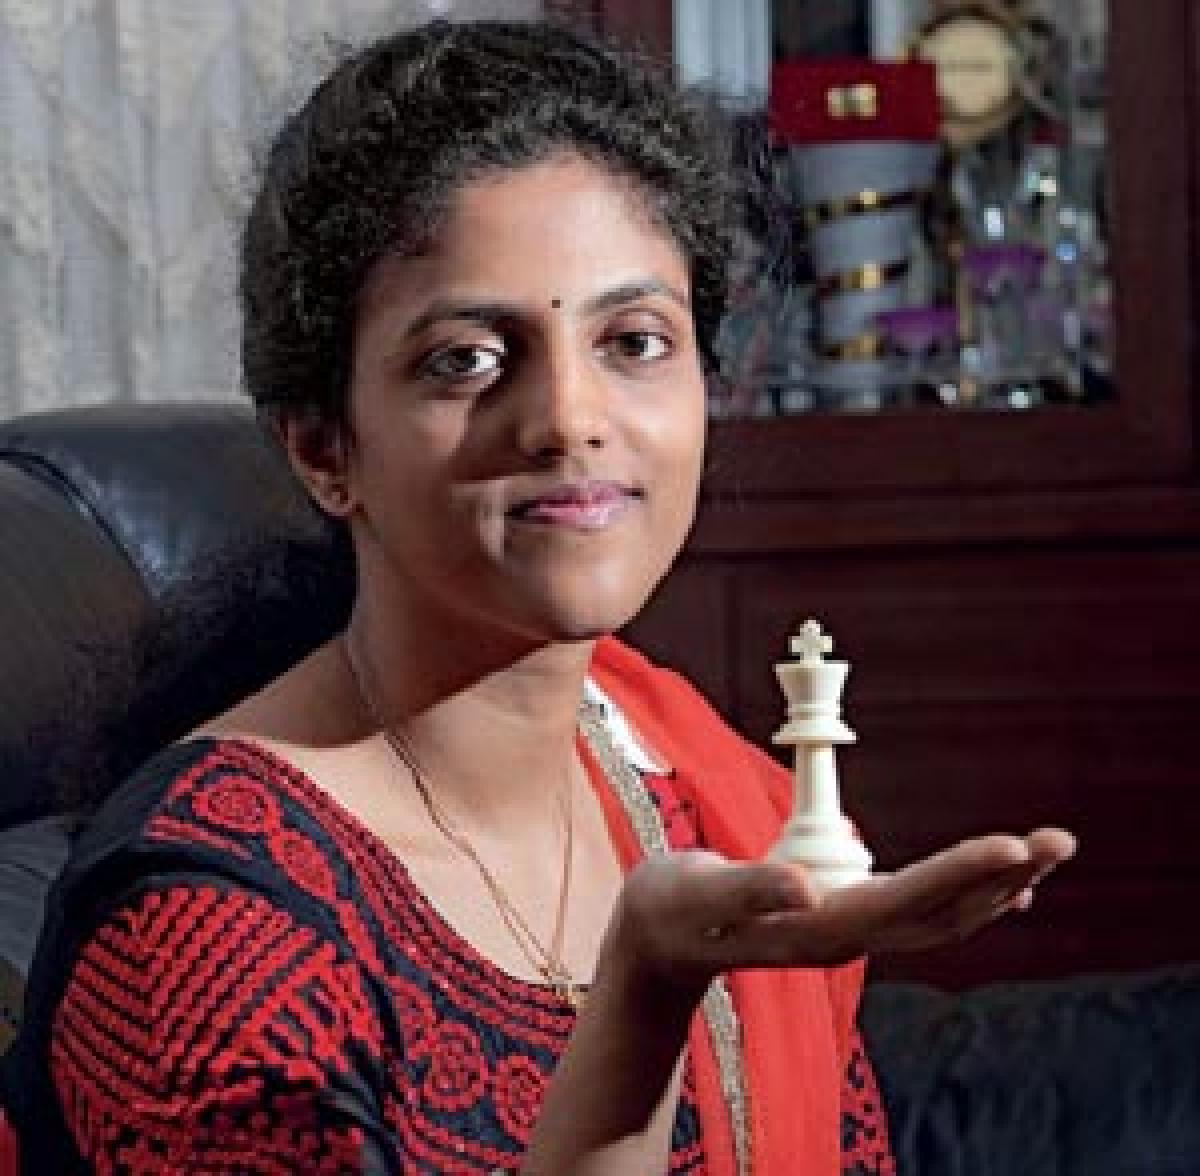 Harika on a high after double delight